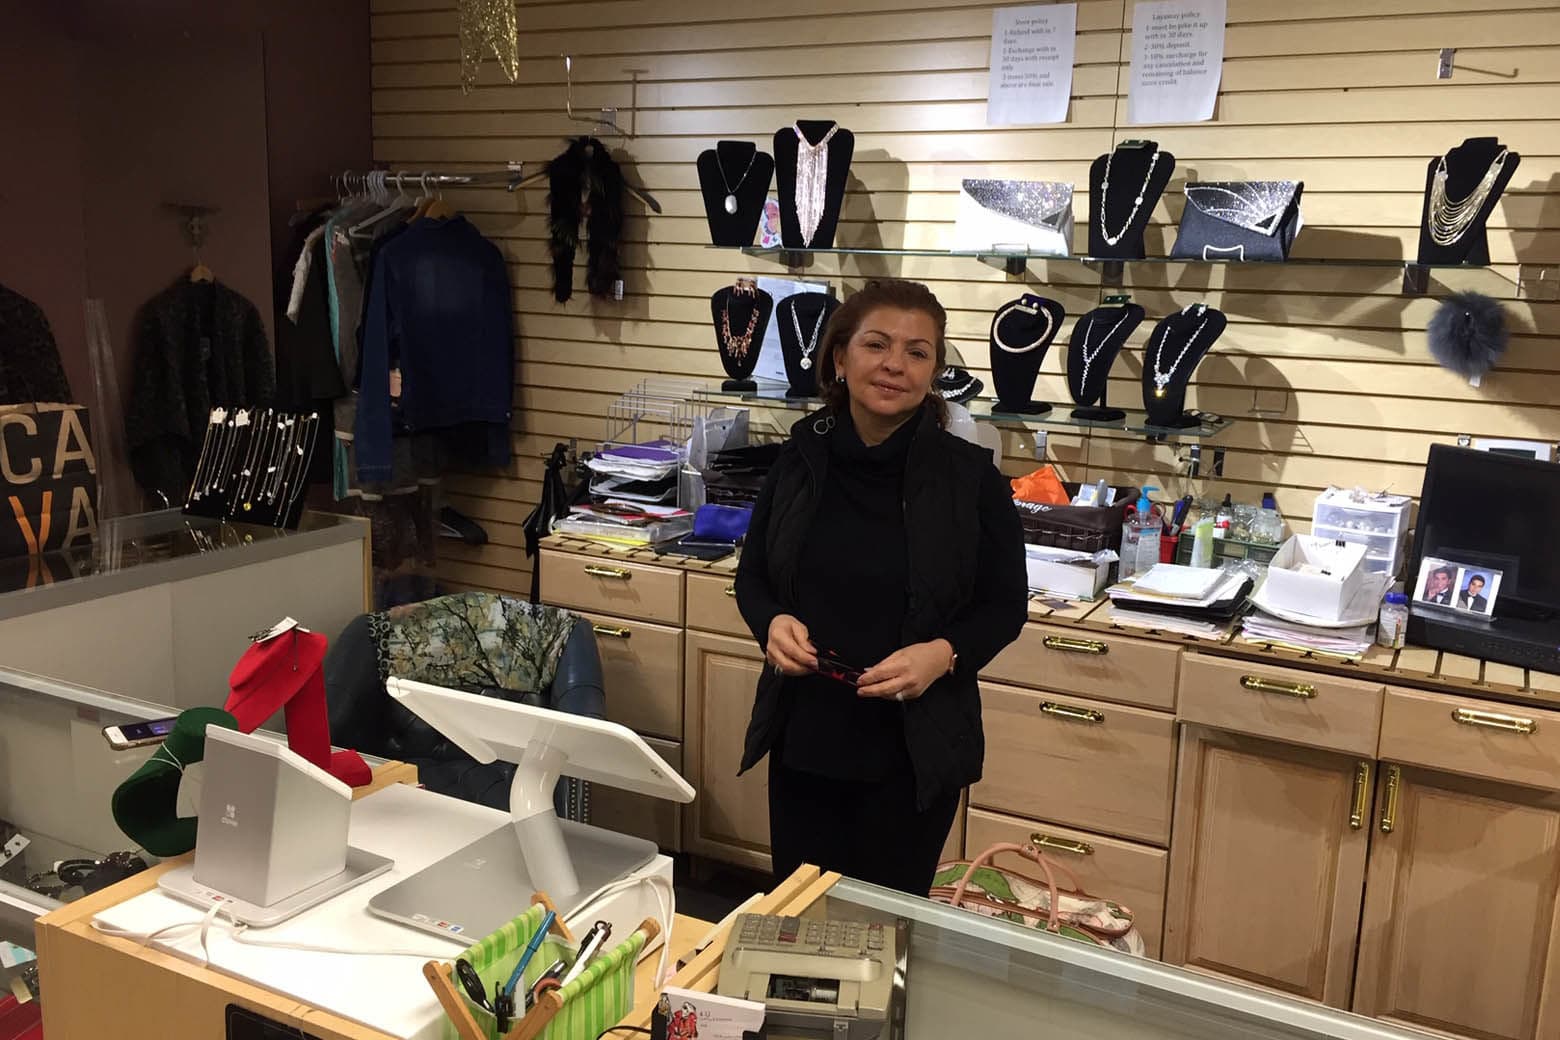 Moj Foroughi's store, 4-U, is stocked full of clothes, jewelry and other accessories. But it was empty of any customers.“Days I open and I just close with zero sales,” she lamented. “It’s been bad.” (WTOP/John Domen)